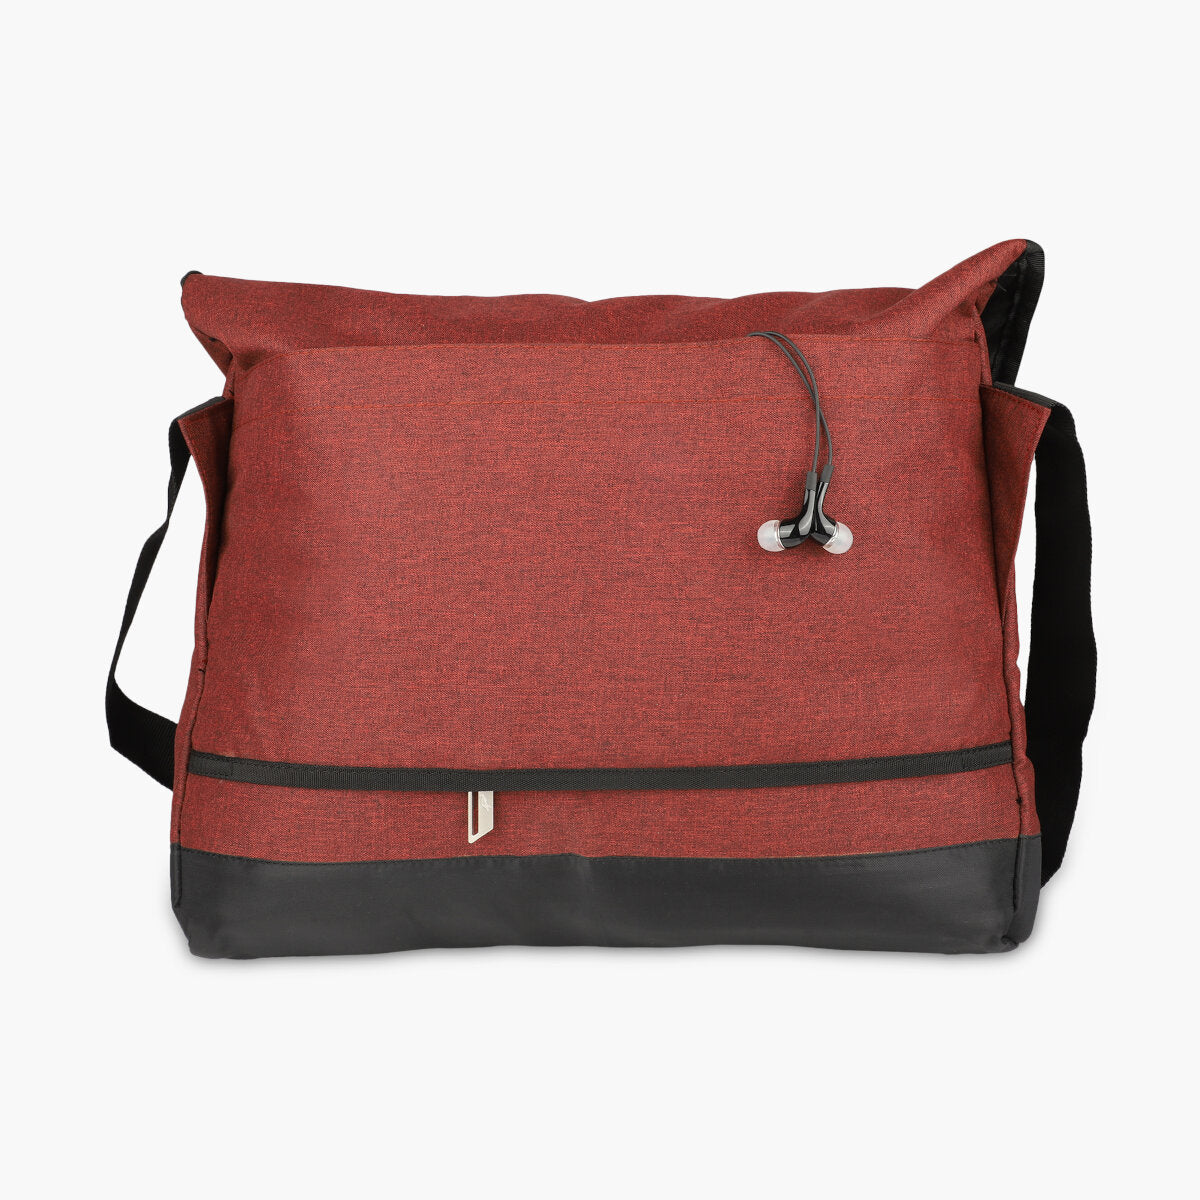 Rust Red, Protecta Leap Laptop Office Messenger Bag-5